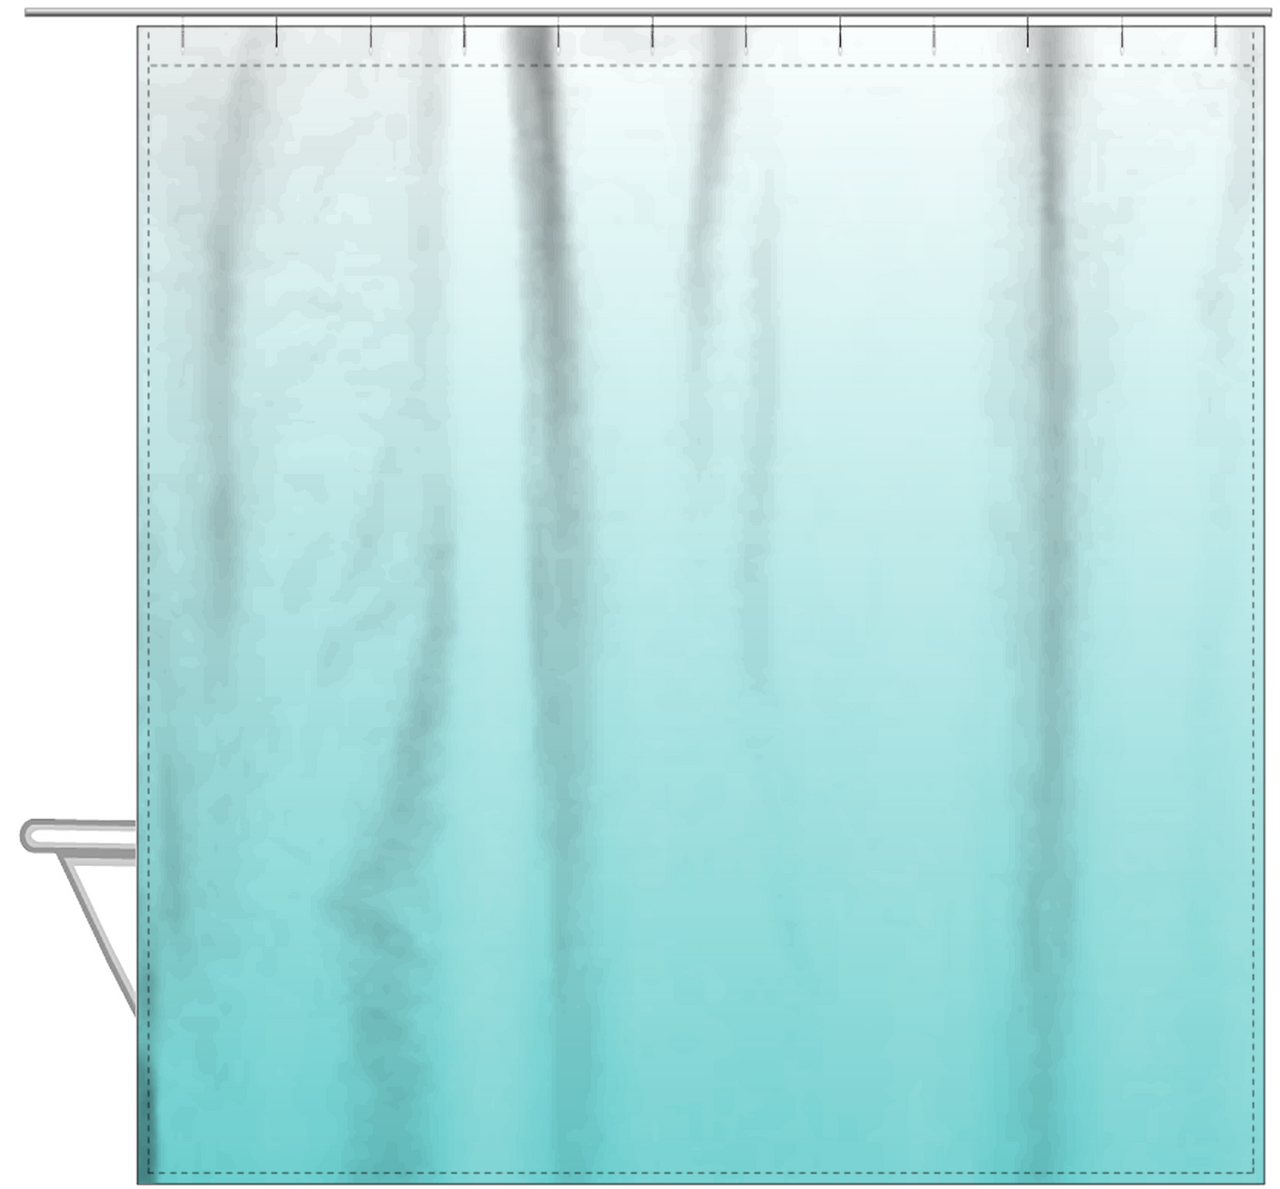 Personalized Ombre Shower Curtain - Teal and White - No Default Text - Ombre I - Hanging View